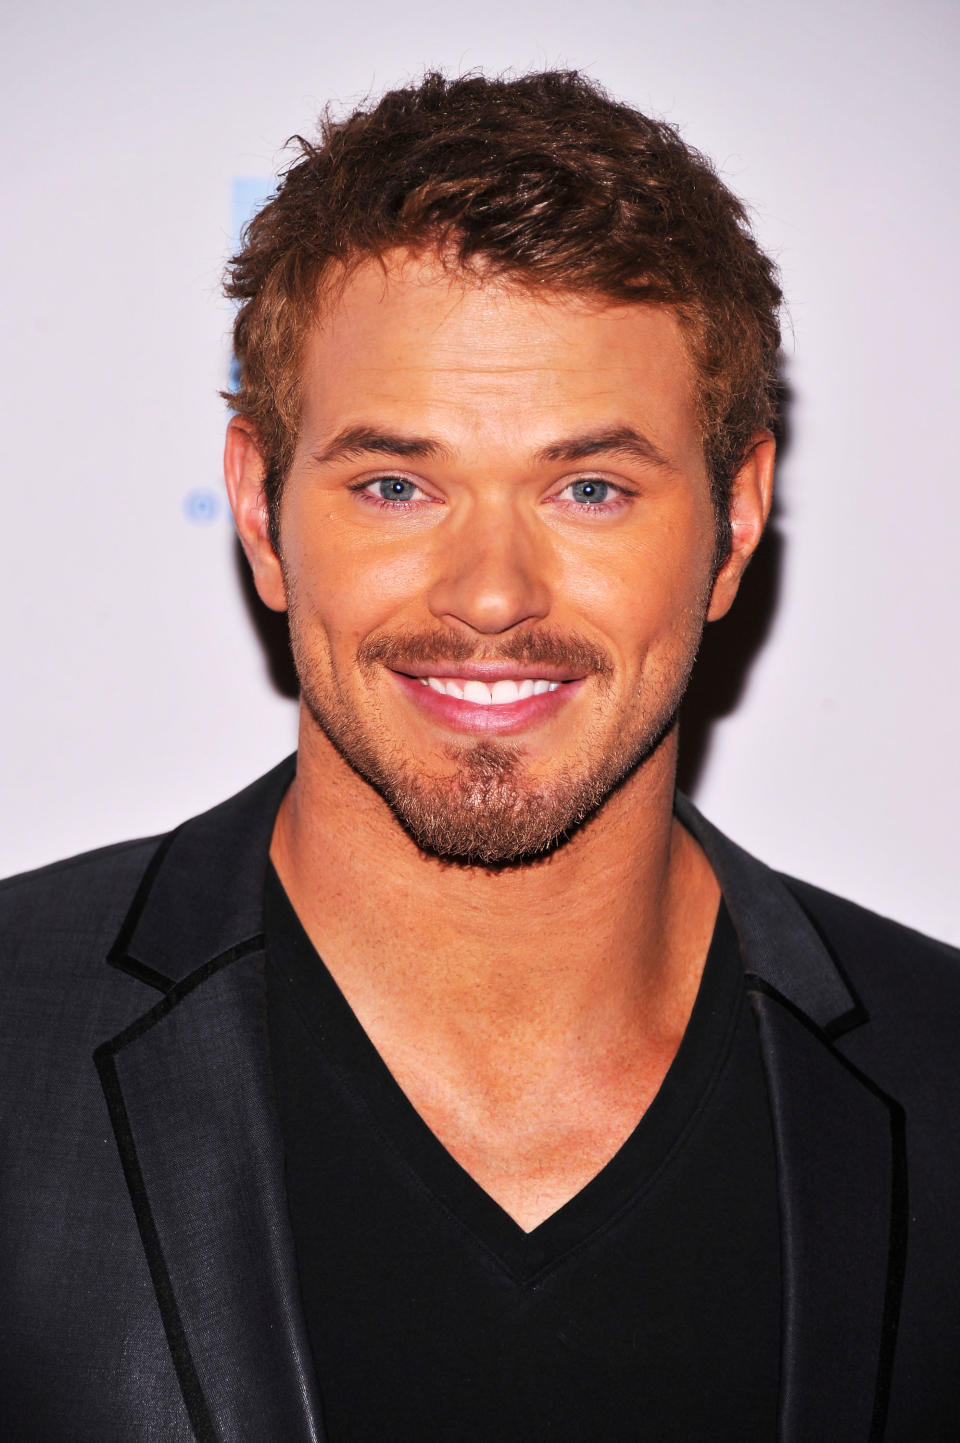 NEW YORK, NY - APRIL 26: Actor Kellan Lutz attends the 2012 TFF Awards during the 2012 Tribeca Film Festival at the Conrad Hotel on April 26, 2012 in New York City. (Photo by Stephen Lovekin/Getty Images)